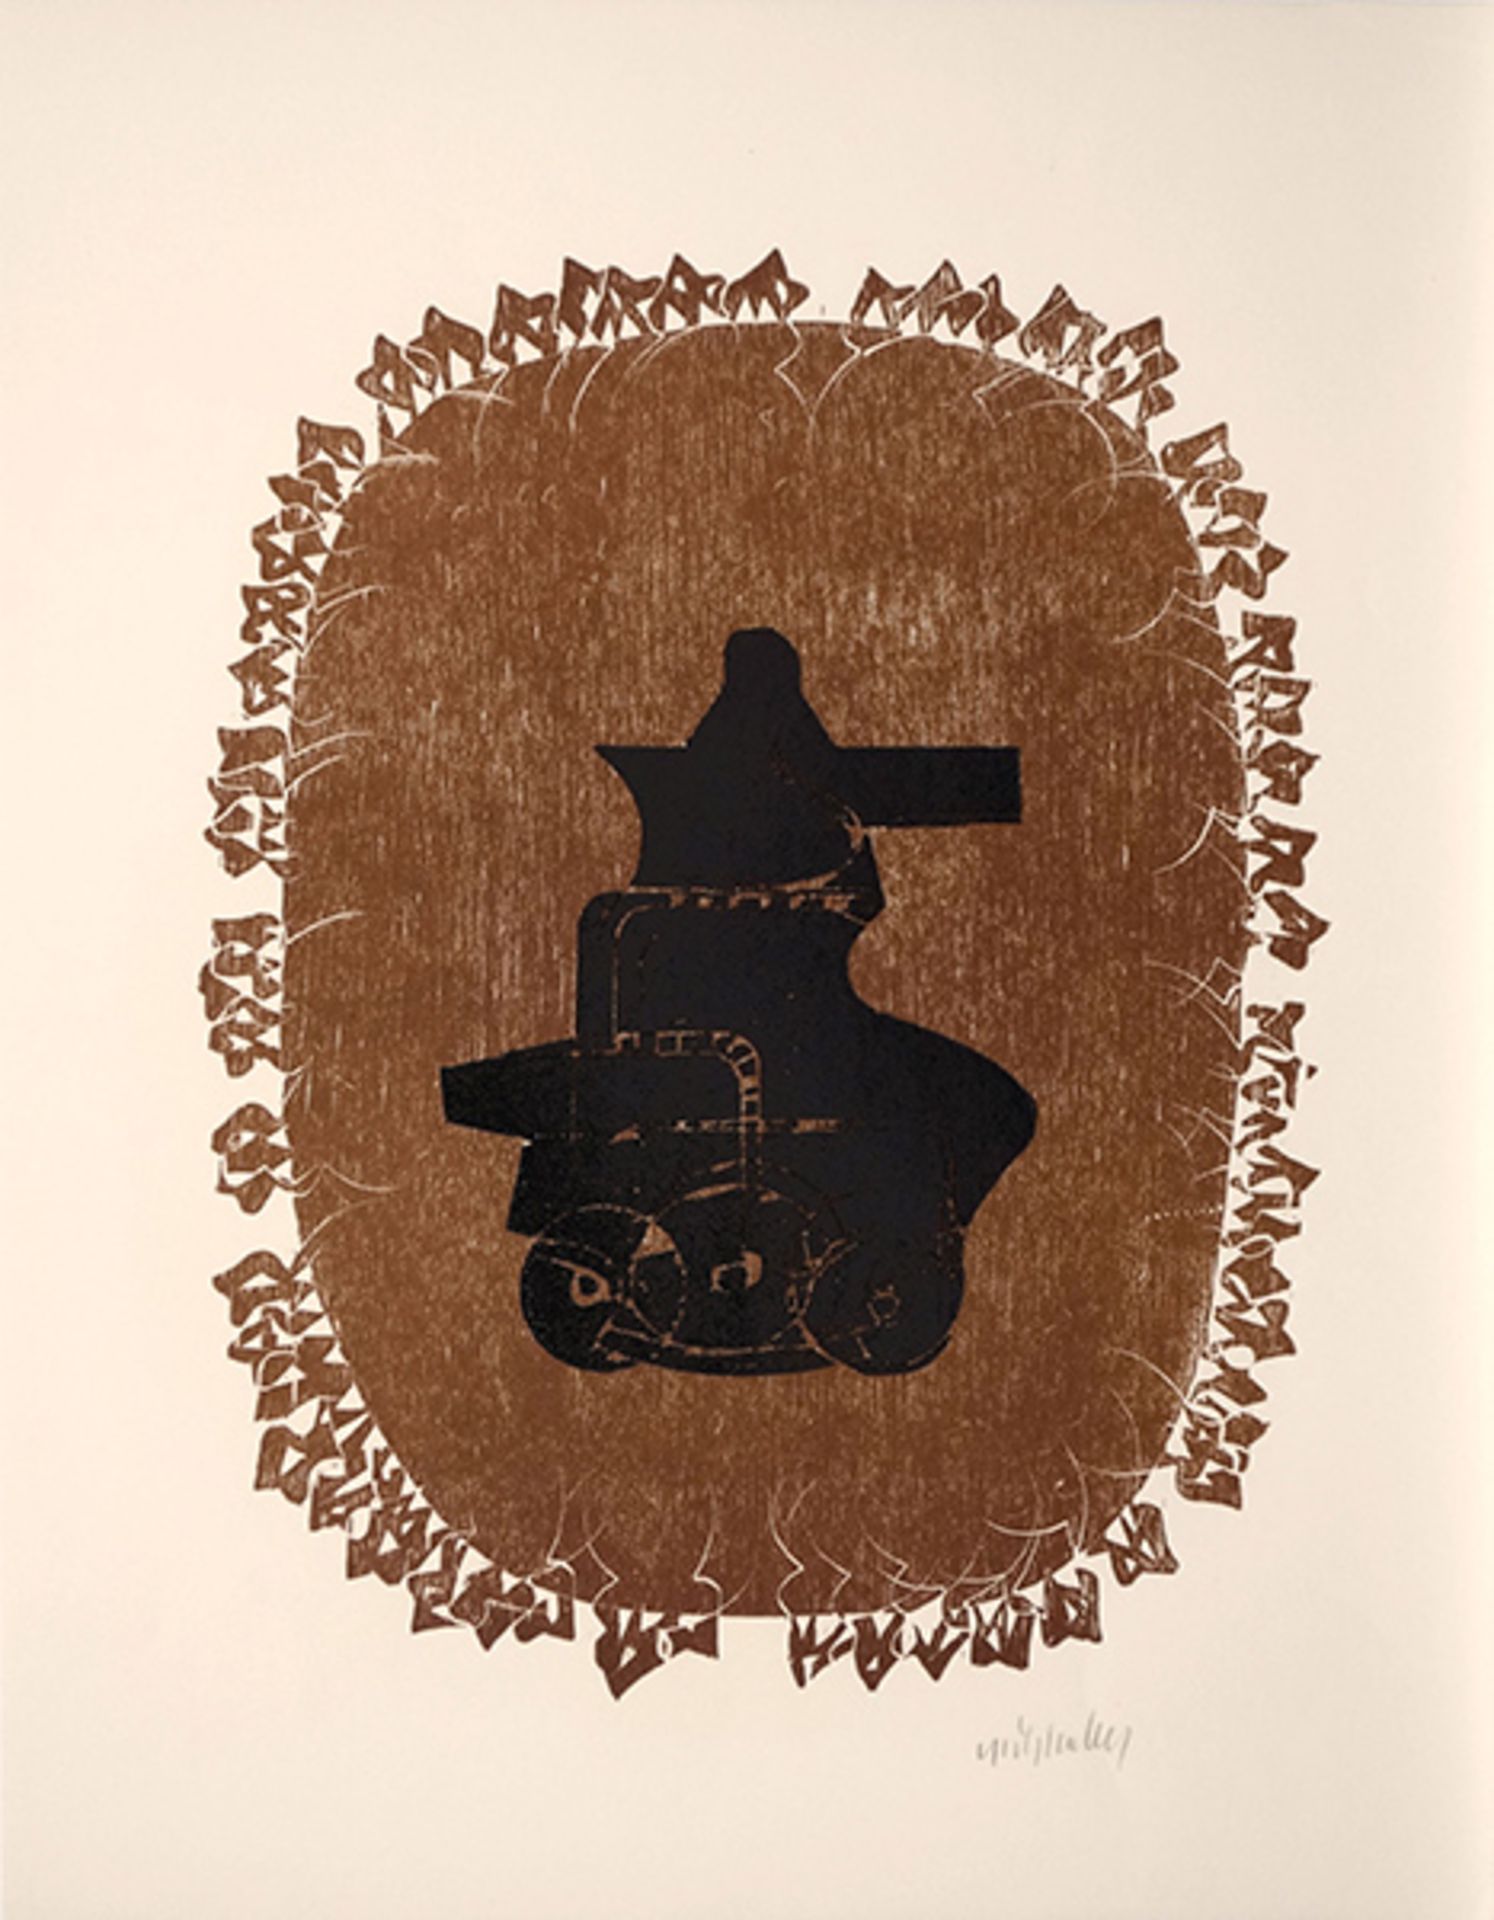 Das Feld des Panzers (1971)Woodcut in Brown and Black on hand made paper. Signed. Sheet size: 47,0 x